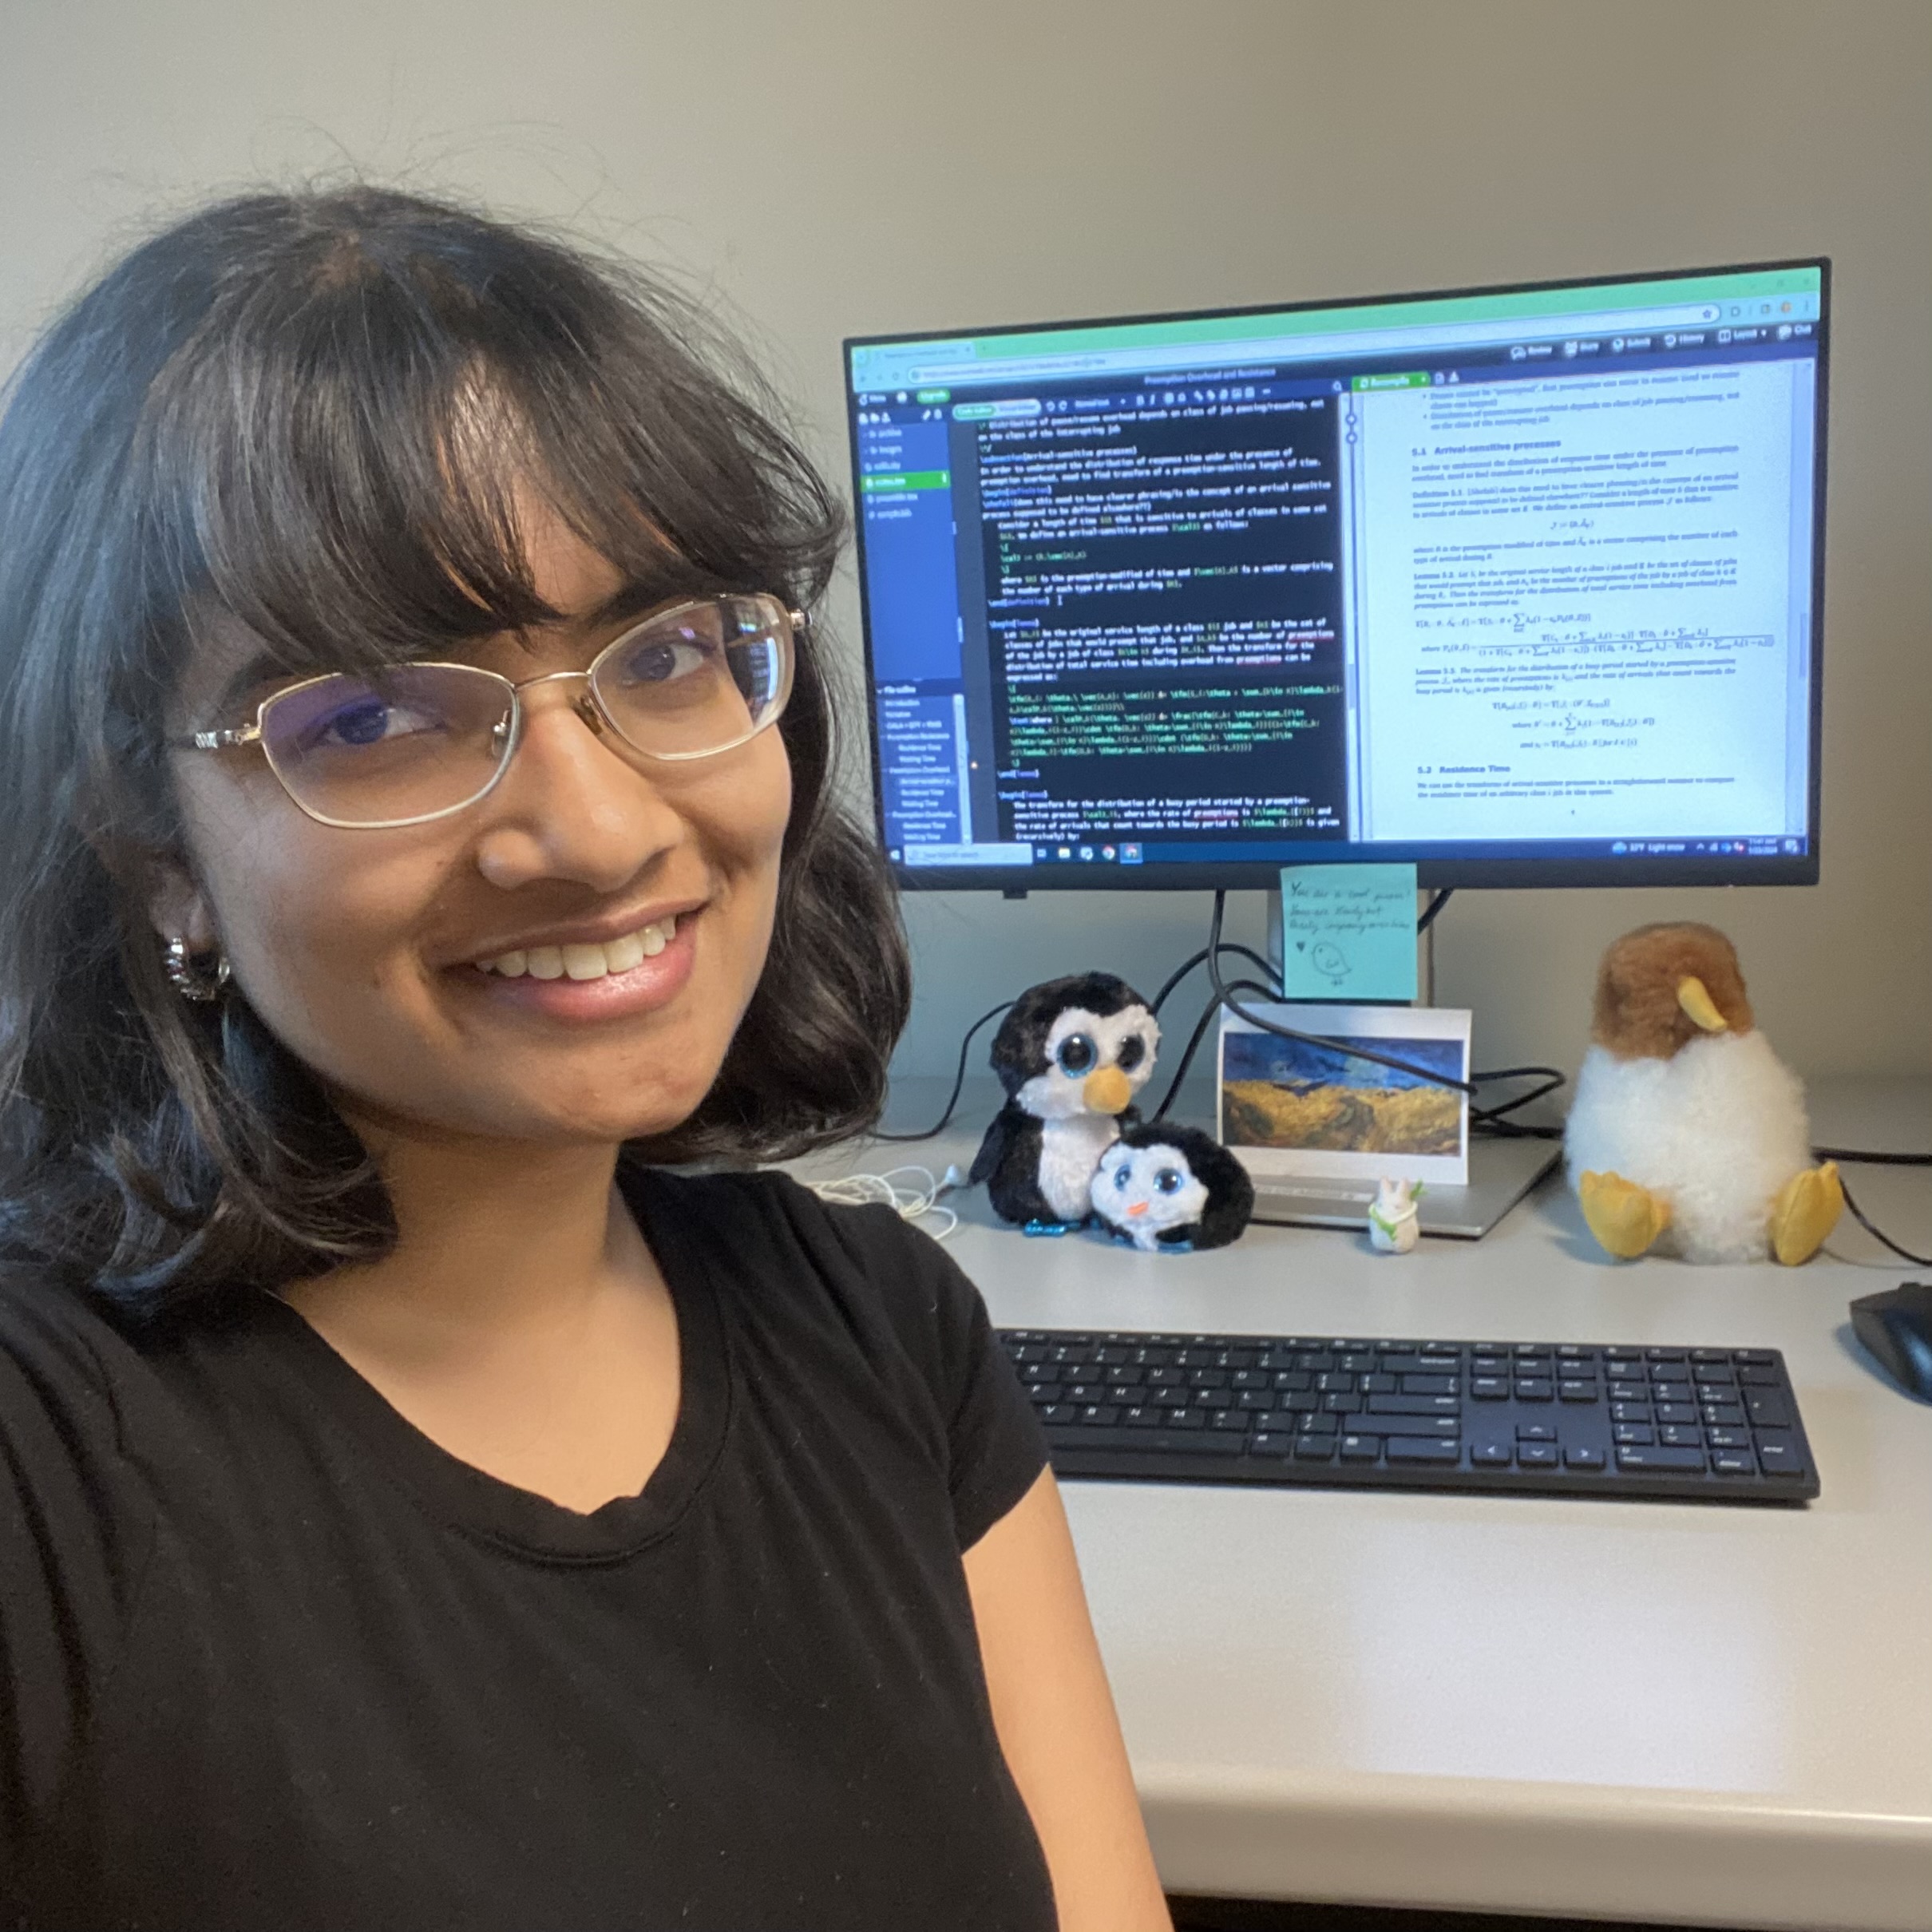 Shefali Profile Picture (she looks cool and smart and has lots of stuffed birds on her desk, along with a computer displaying overleaf and some long formulas)